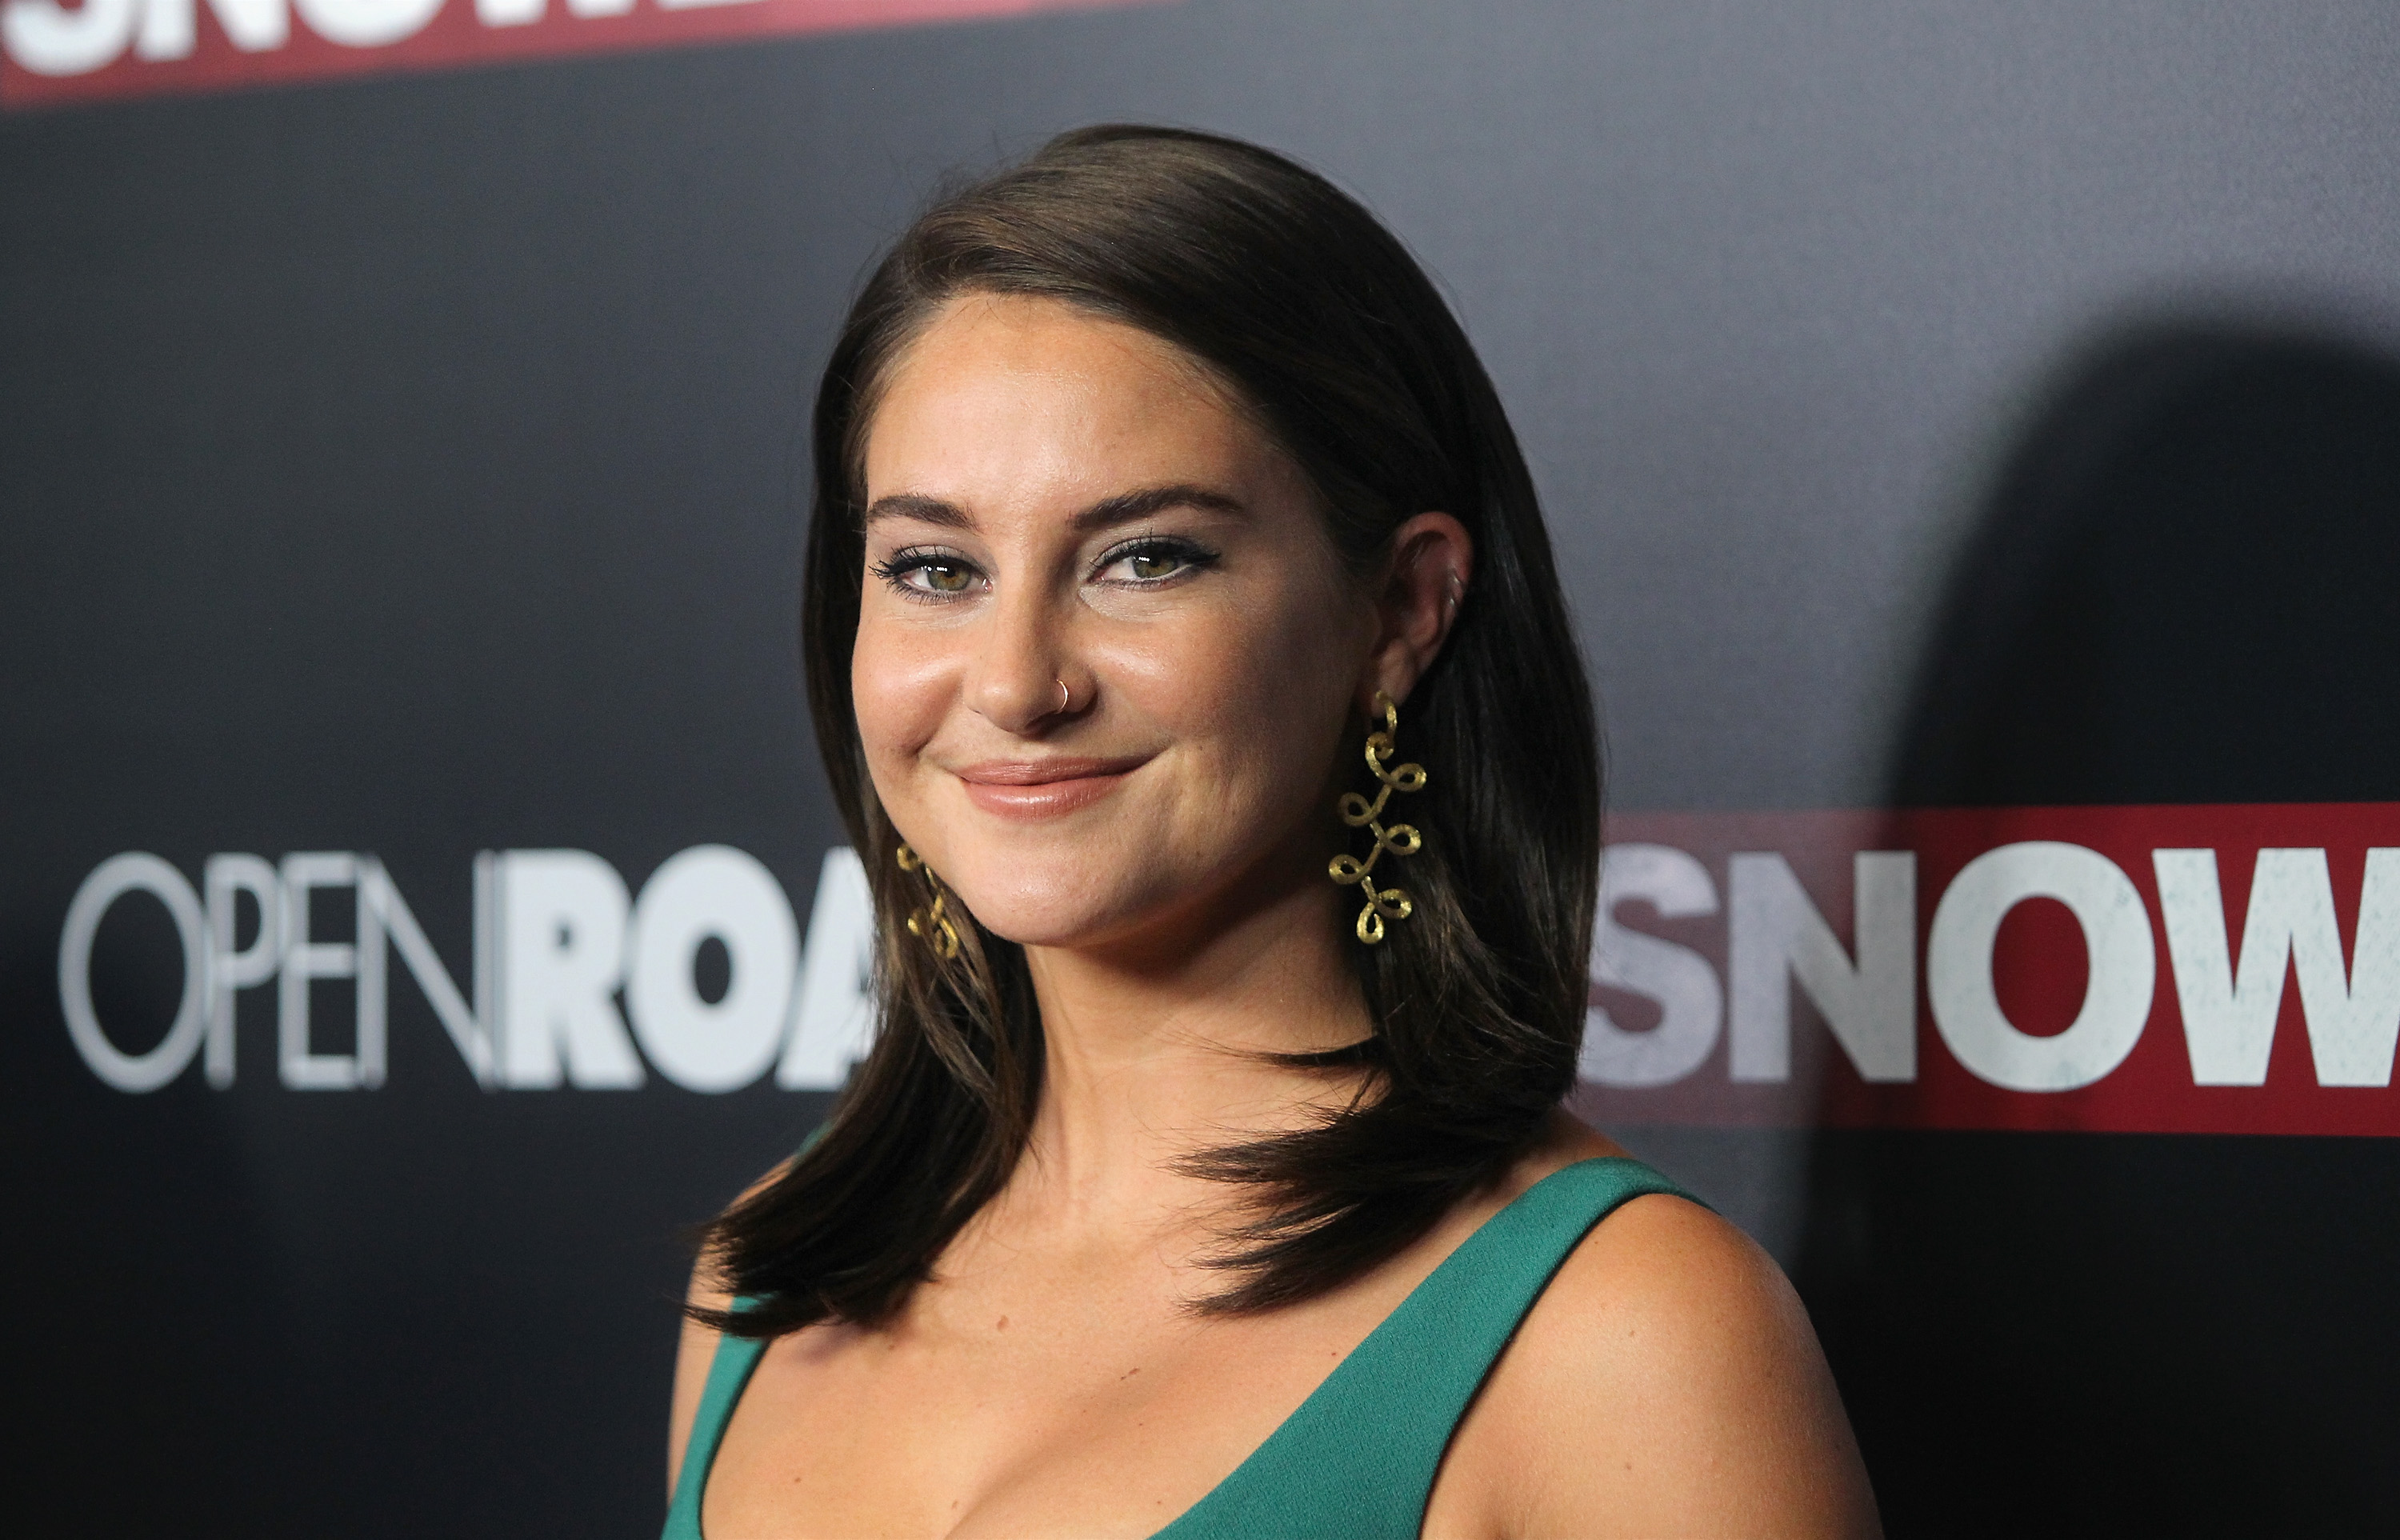 NEW YORK, NY - SEPTEMBER 13:  Actress Shailene Woodley attends the "Snowden" New York premiere at AMC Loews Lincoln Square on September 13, 2016 in New York City.  (Photo by Jim Spellman/WireImage) (Jim Spellman&mdash;WireImage/Getty Images)